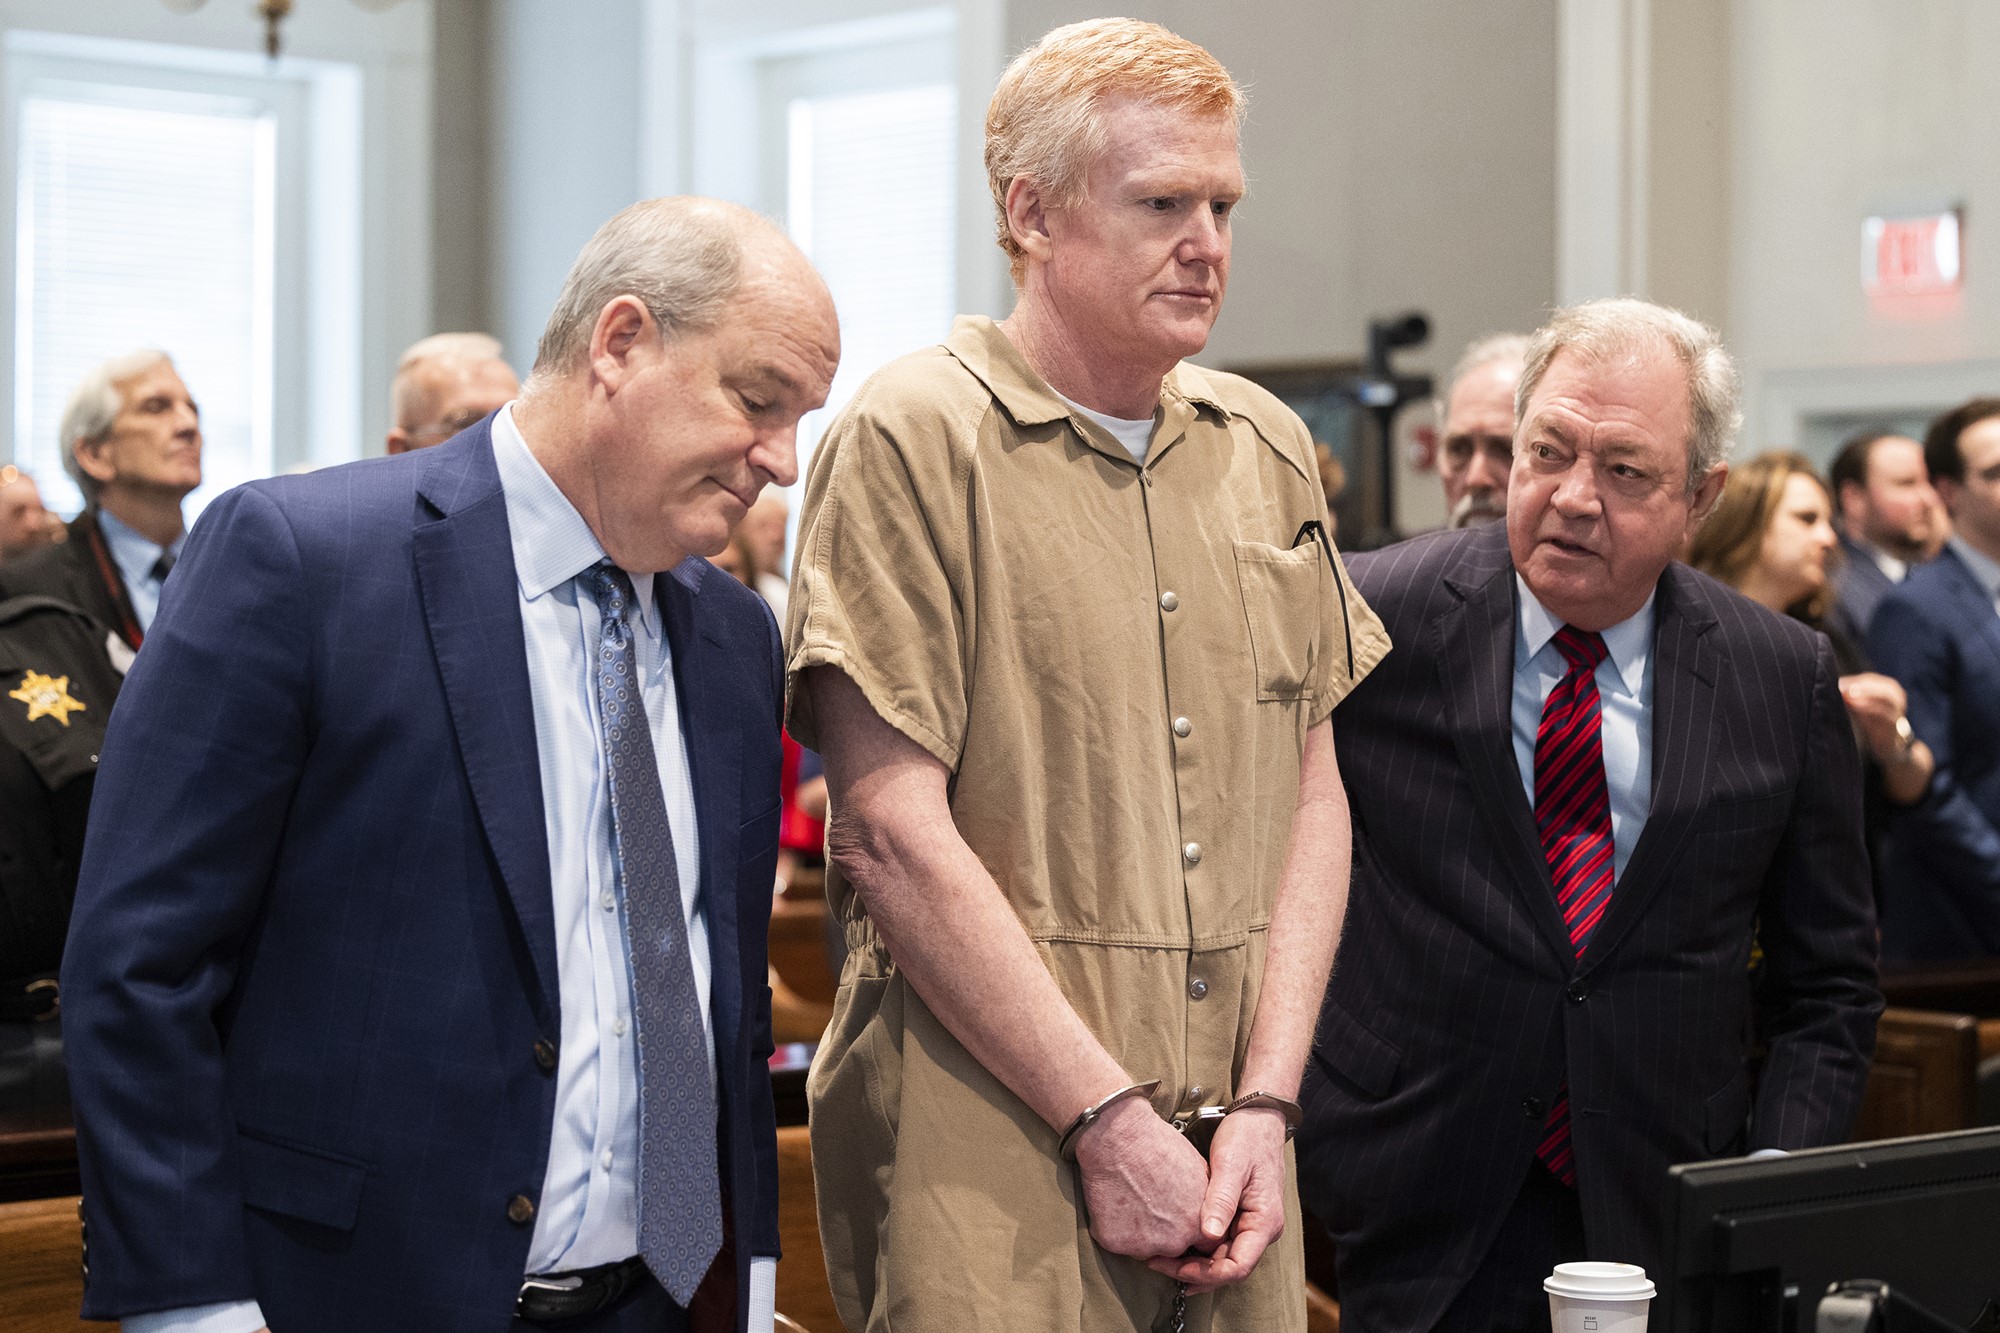 A man with blond hair is wearing a beige jumpsuit and shackles. Next to him are men in suits.